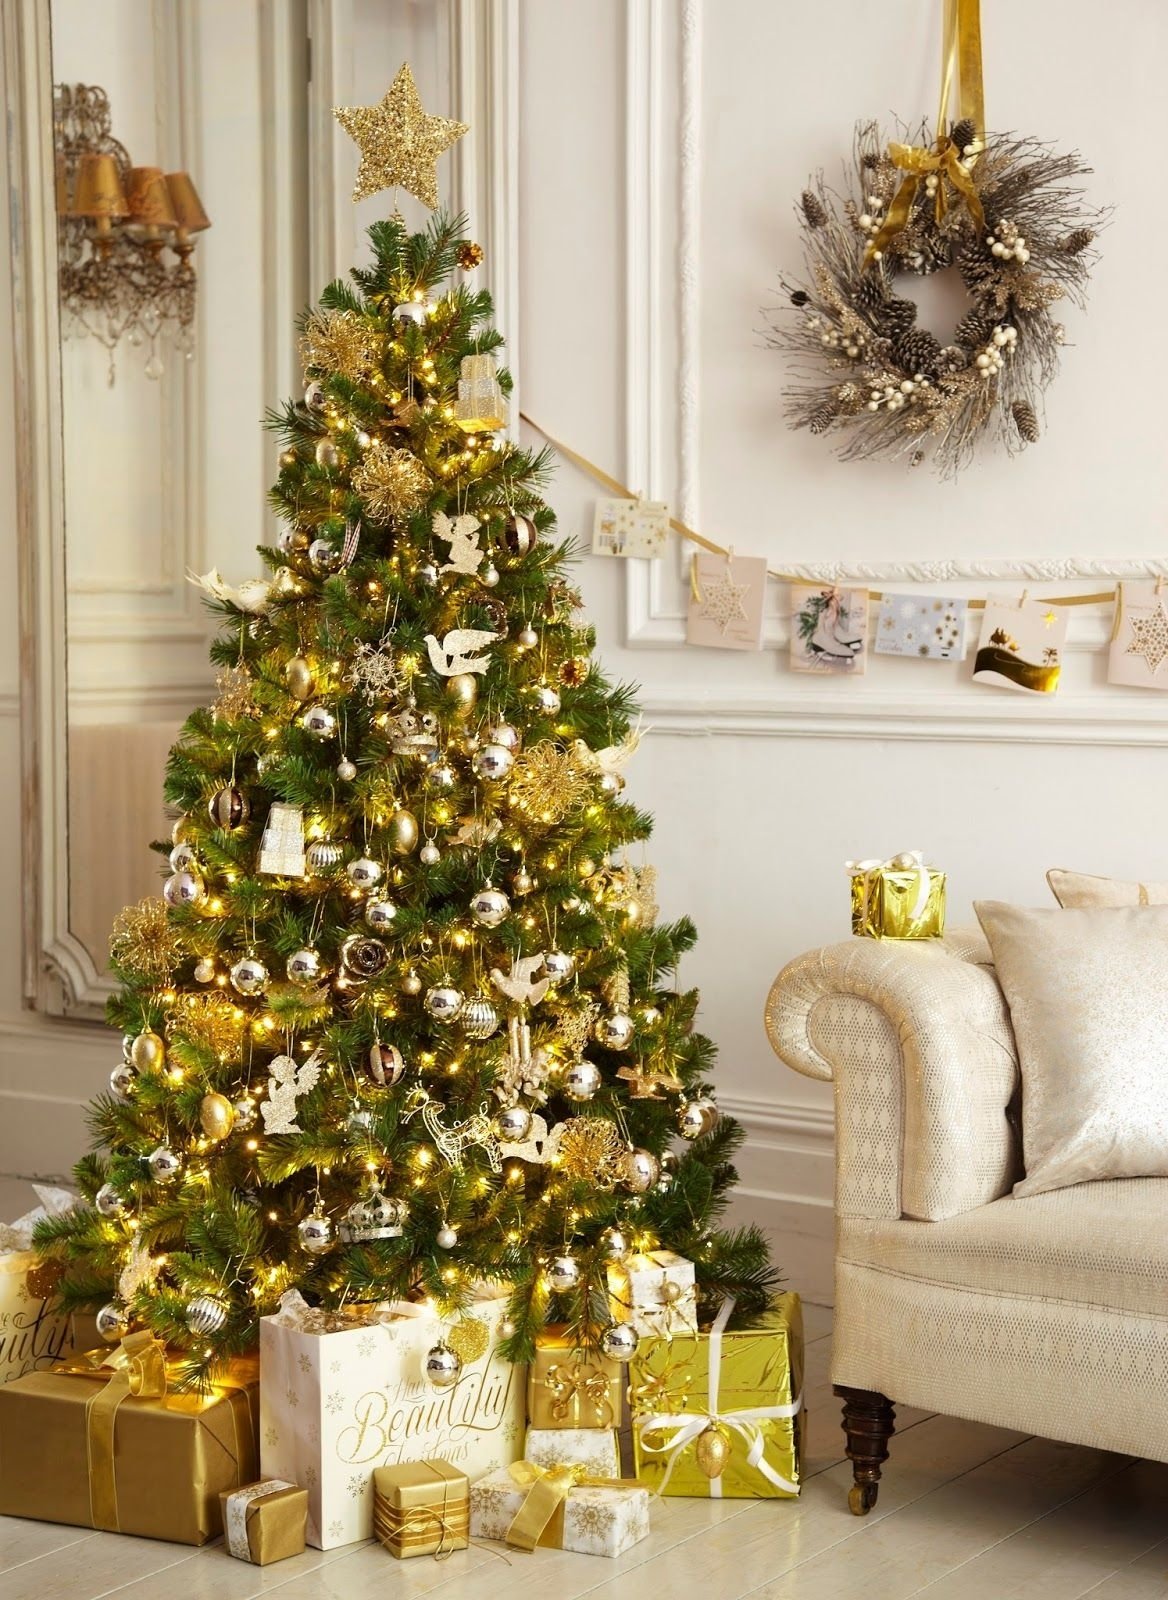 10 Perfect Decorating Ideas For Christmas 2013 40 gold christmas tree decorations ideas for coming holiday session 2022